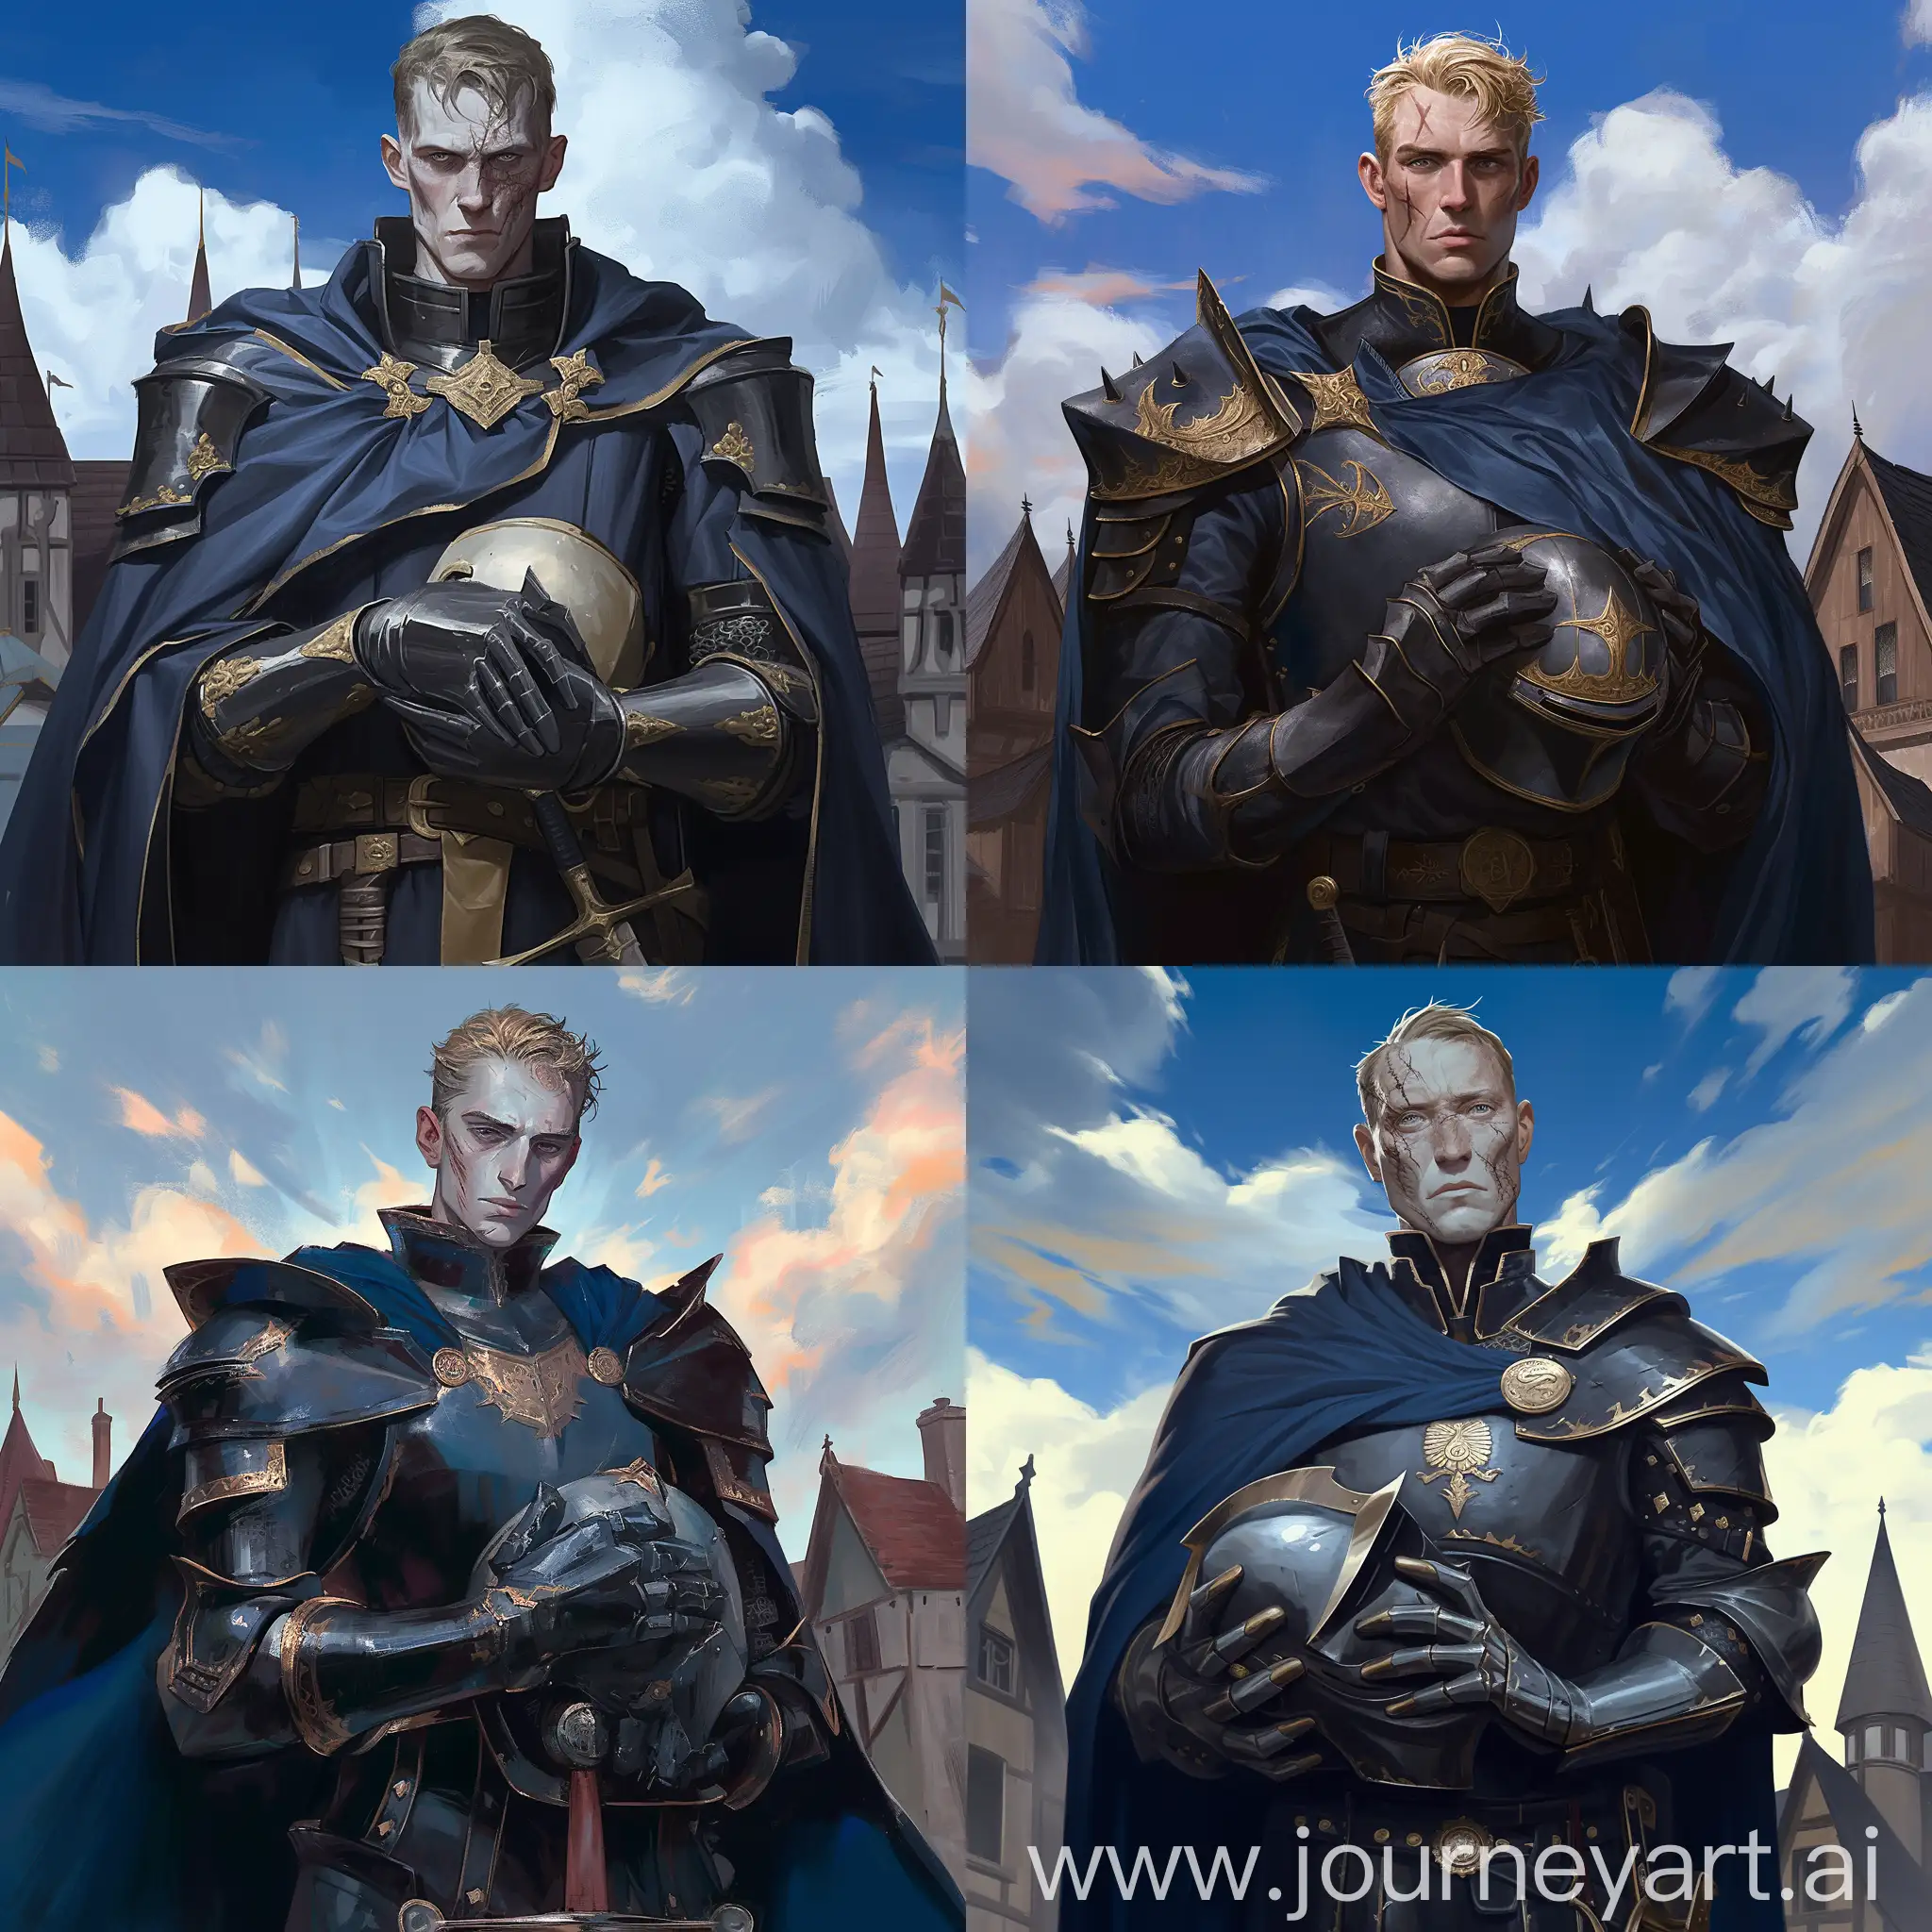 Handsome-Male-Paladin-in-Knights-Armor-with-Dark-Blue-Cloak-and-Gold-Trim